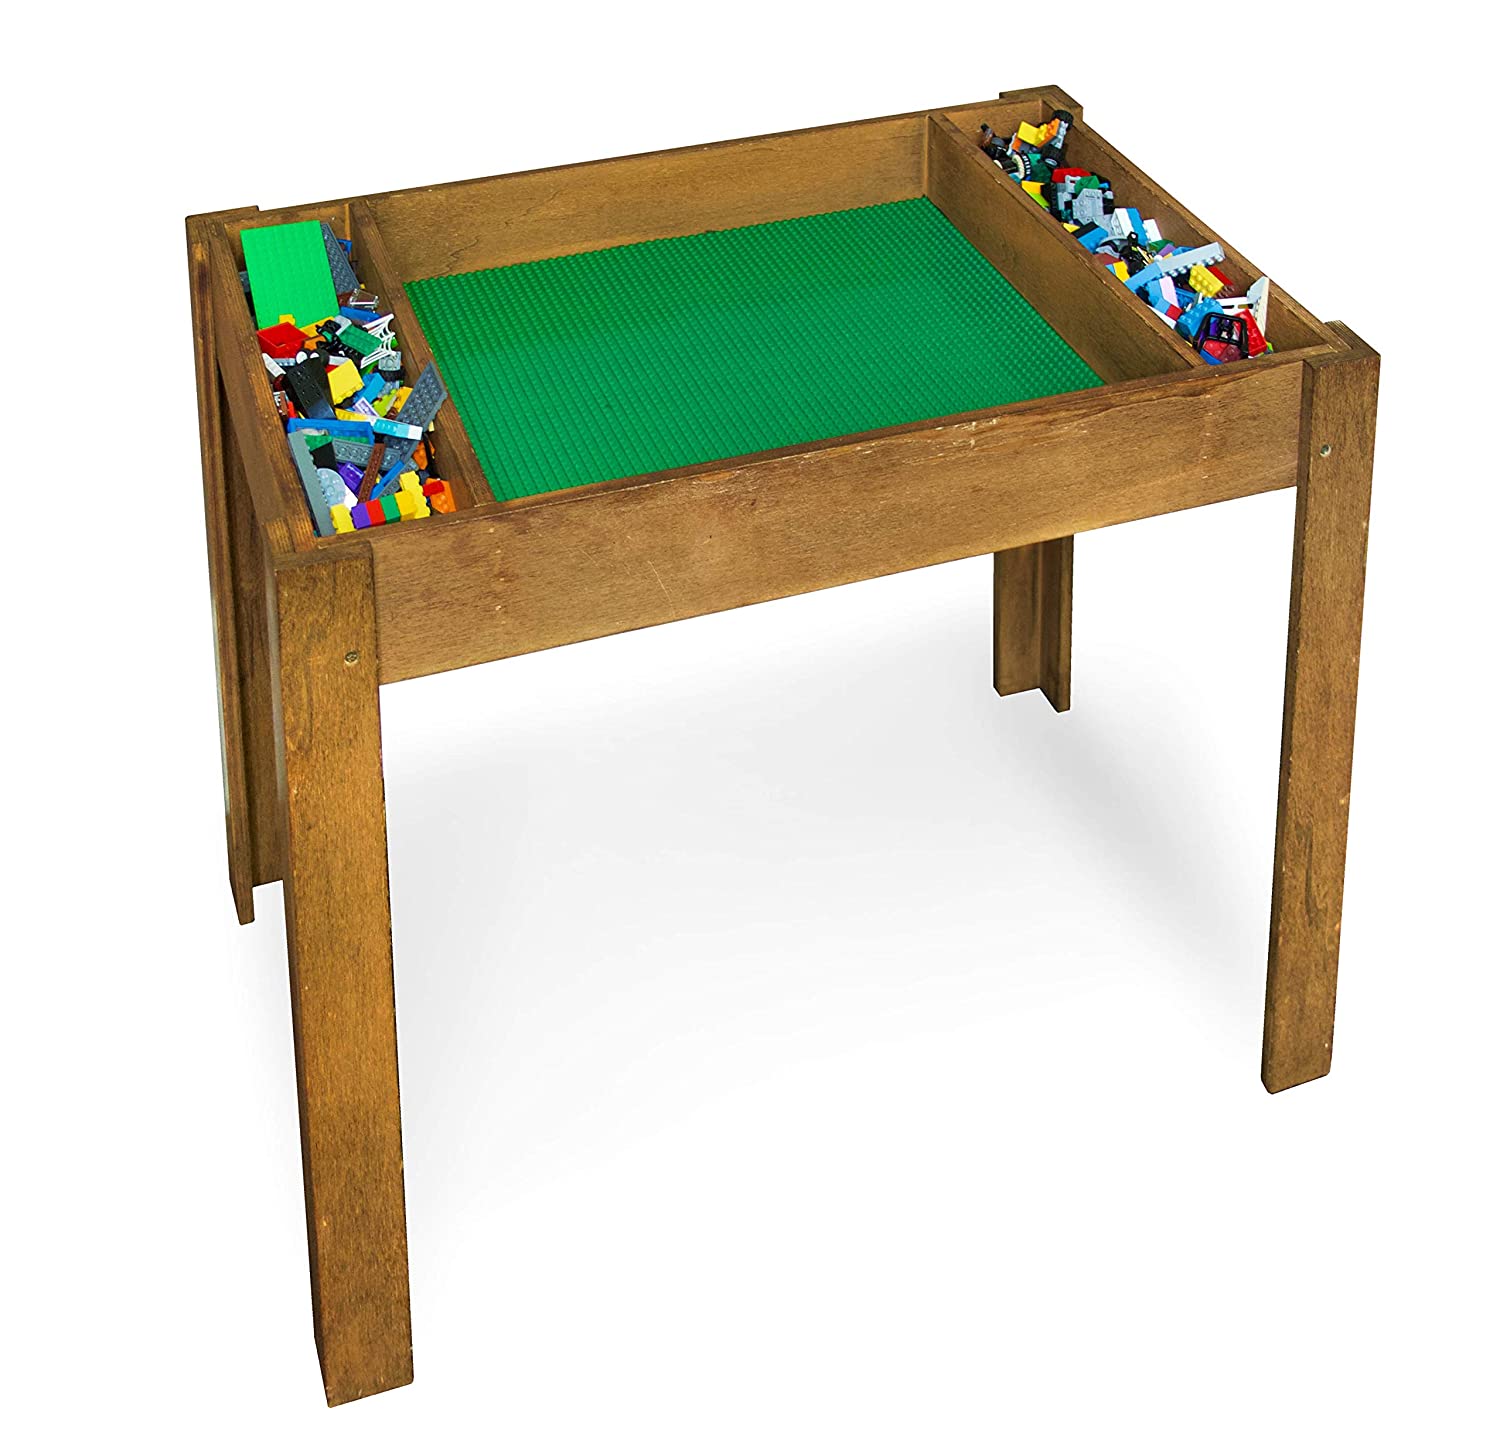 Brick Nation Lego Compatible Table with Storage for Older Kids